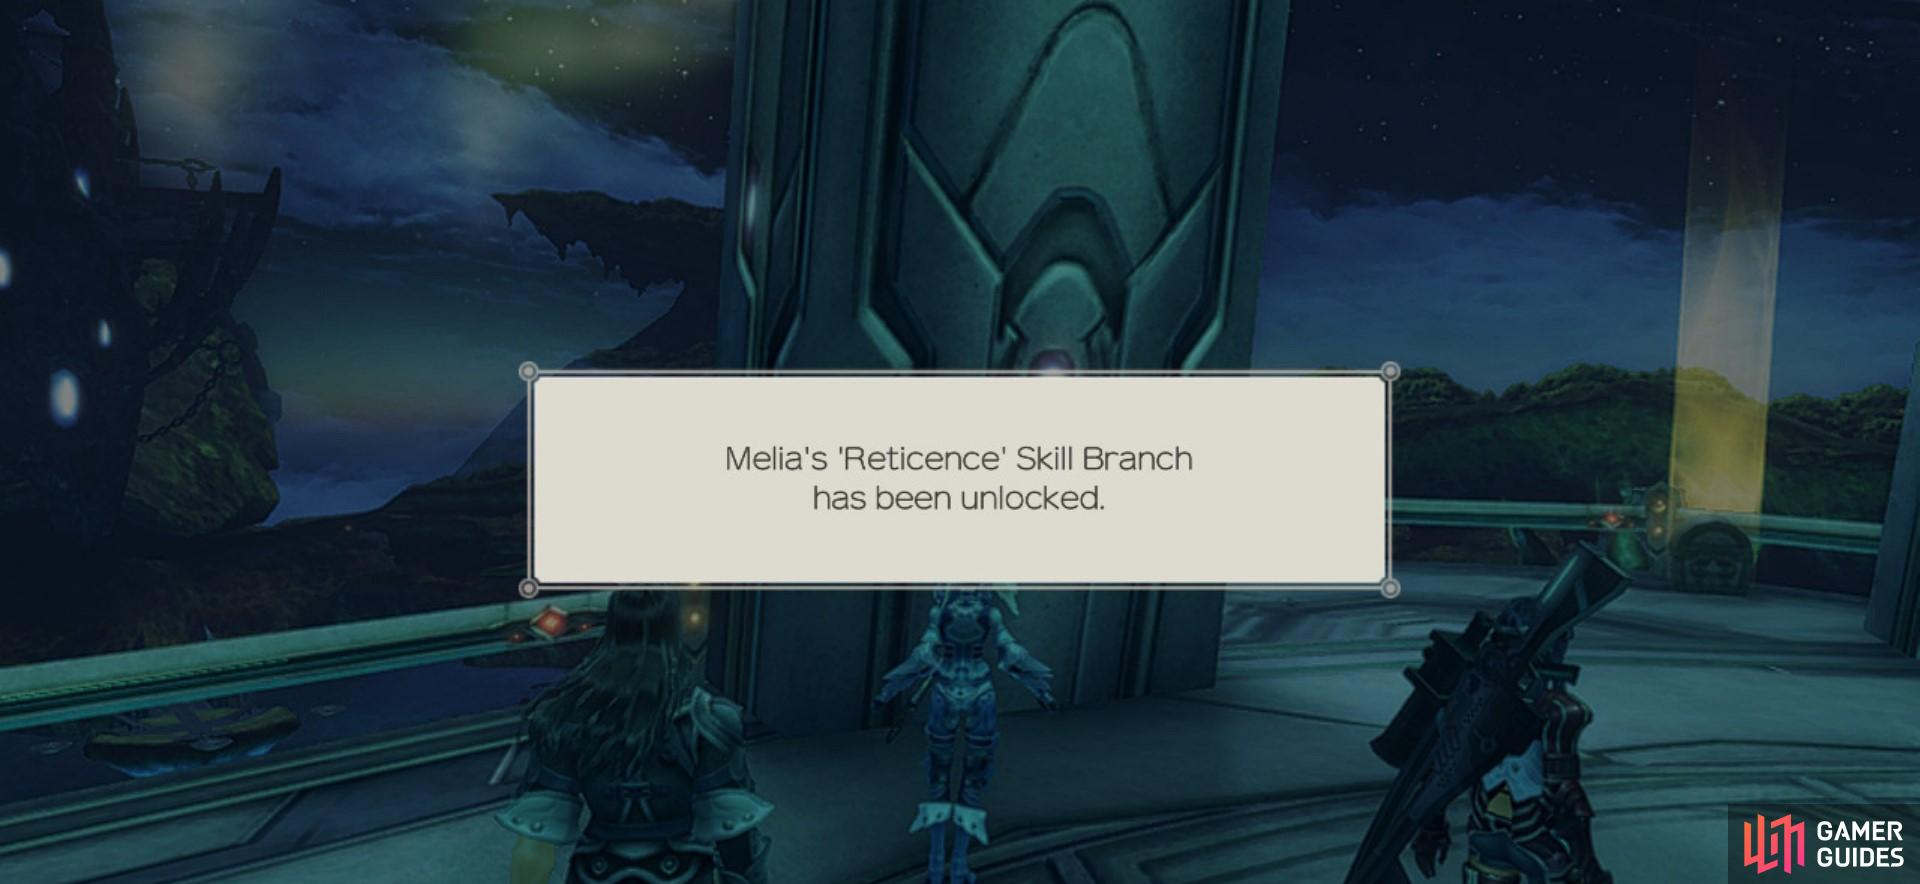 Completing this quest will unlock Melia's skill branch, Reticence. 